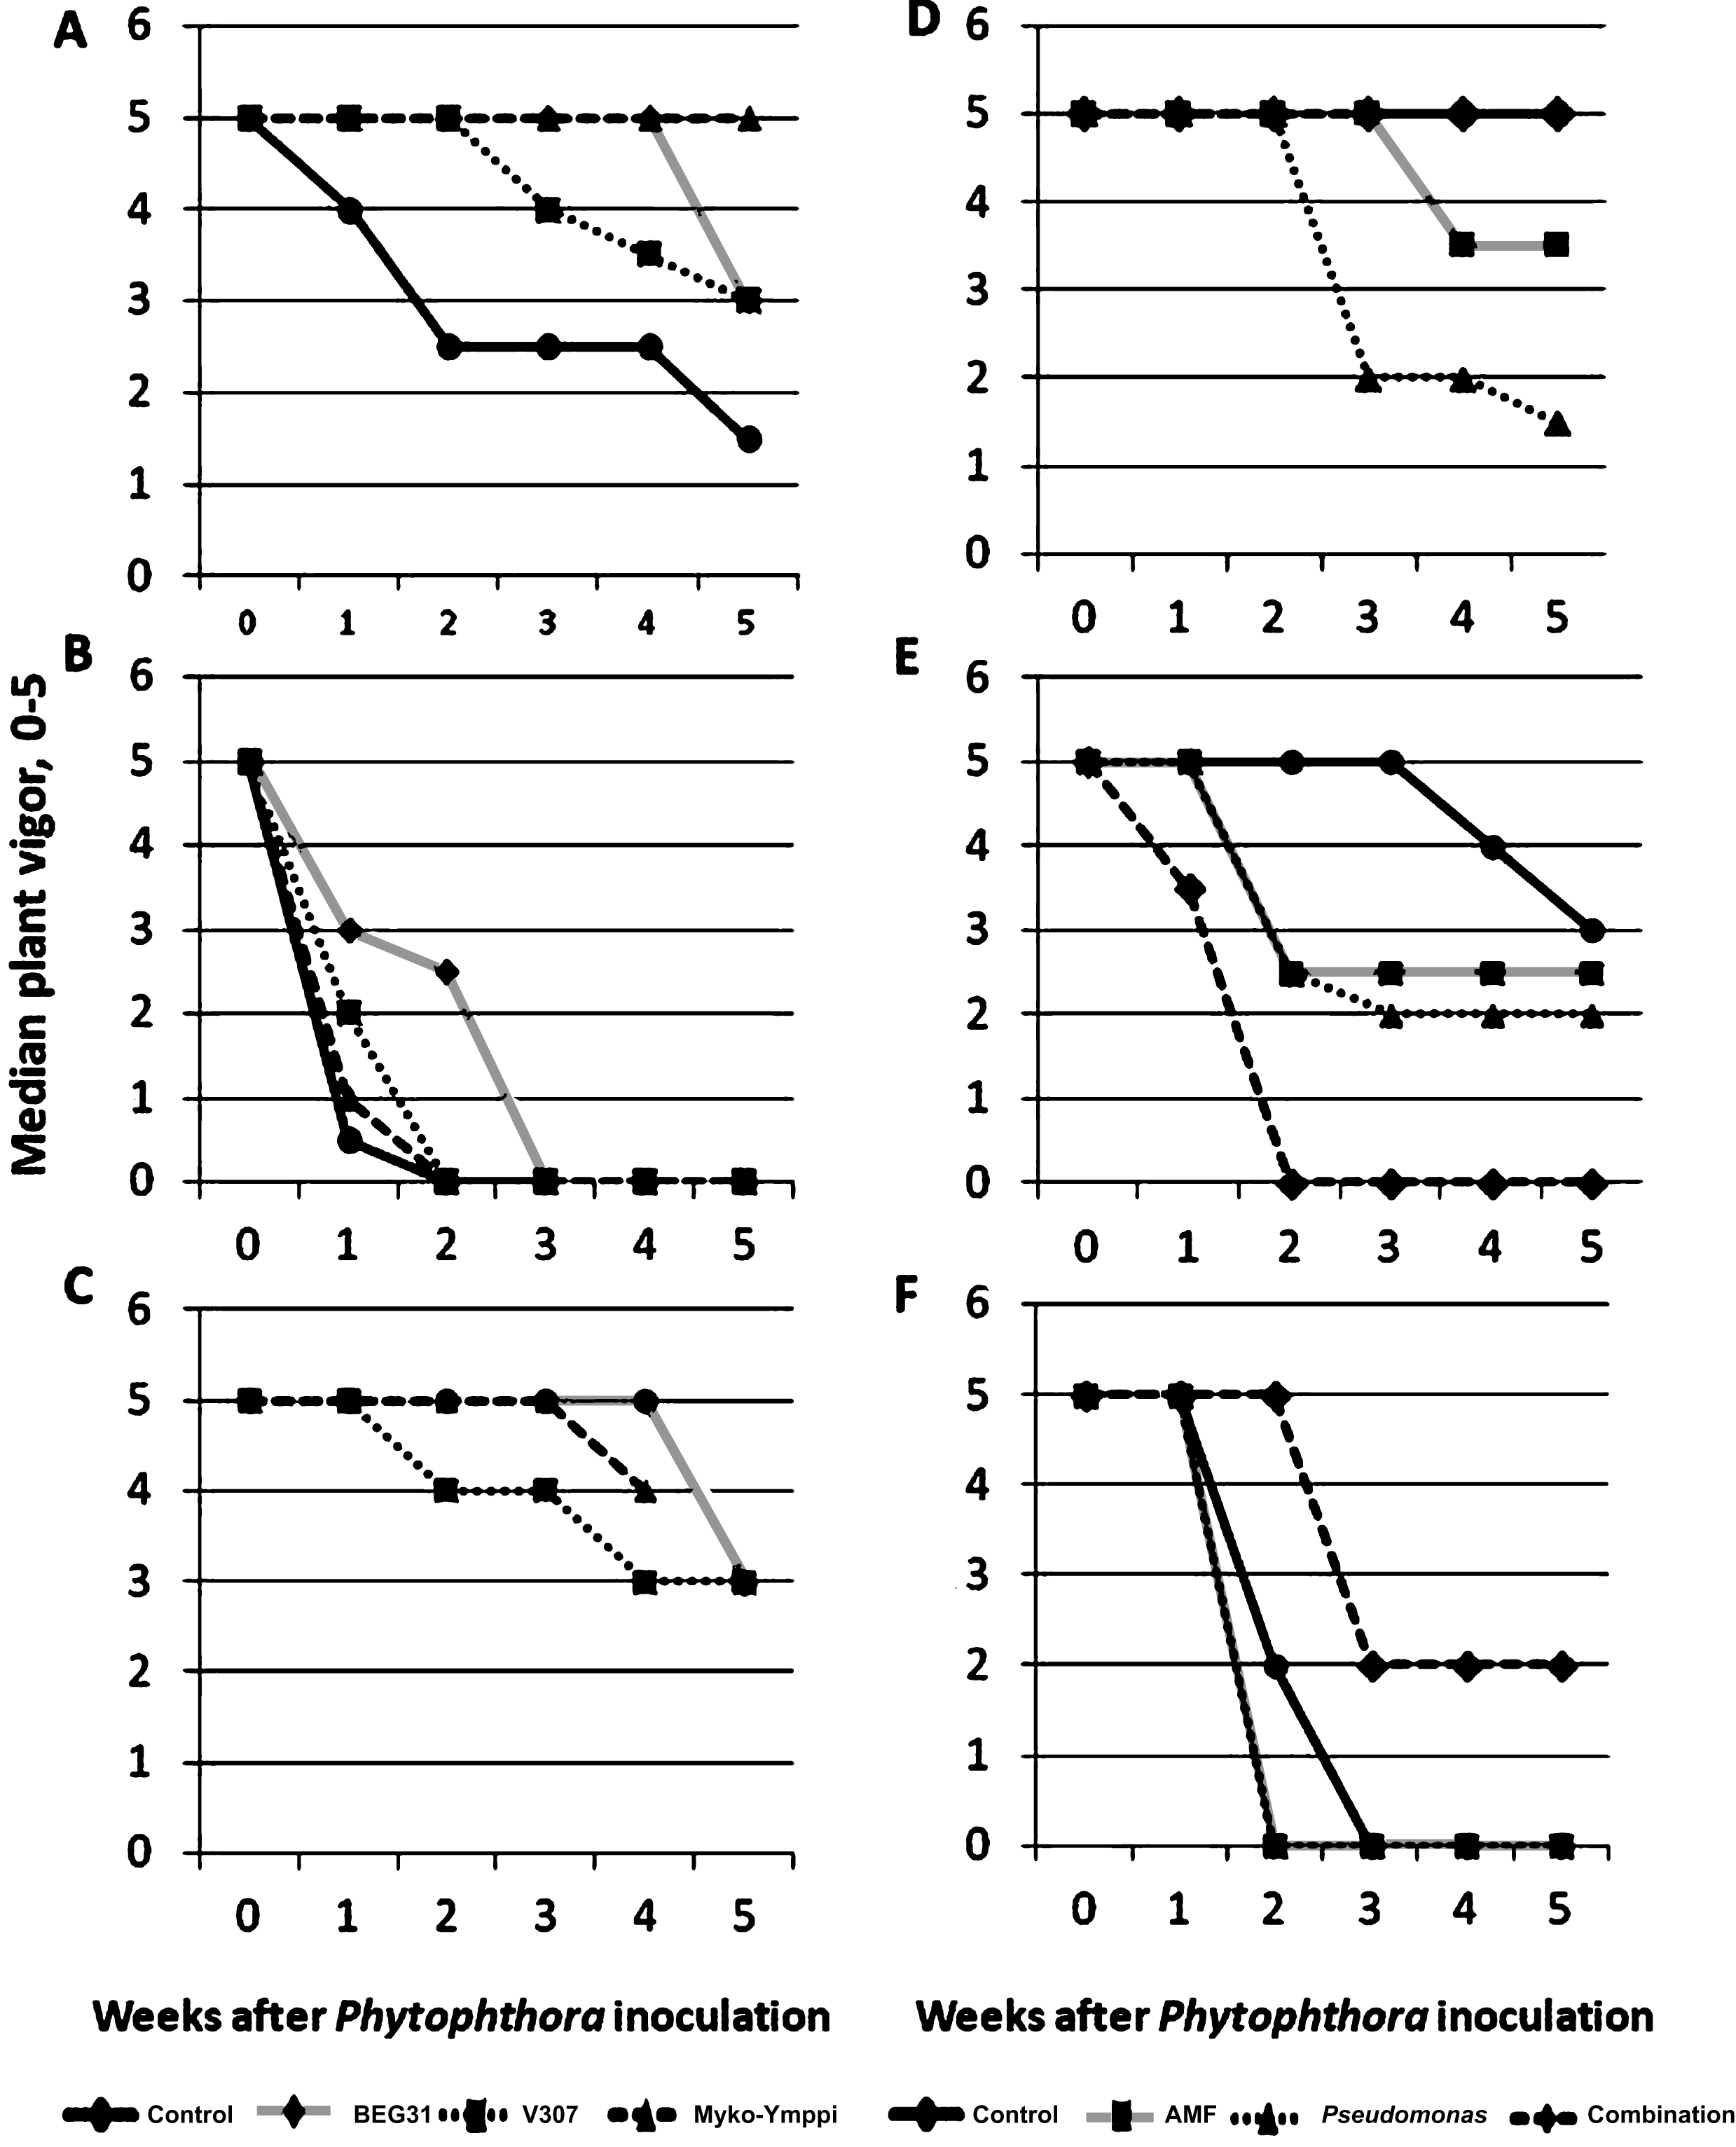 Weekly development of median plant vigor in Phytophthora inoculated plants (N = 6) in Experiments 1 and 3 on different growing media (A,B and C in Experiment 1 and D, E, and F in experiment 3) and under different treatments (3 AMF strains and a control without AMF inoculation in Experiment 1 and endophytic bacteria, AMF strain, their combination and a control without AMF or endophyte inoculation in experiment 3). Growing media described in Table 2. Myko-Ymppi treatment’s values on growing medium C are missing in the last observation.